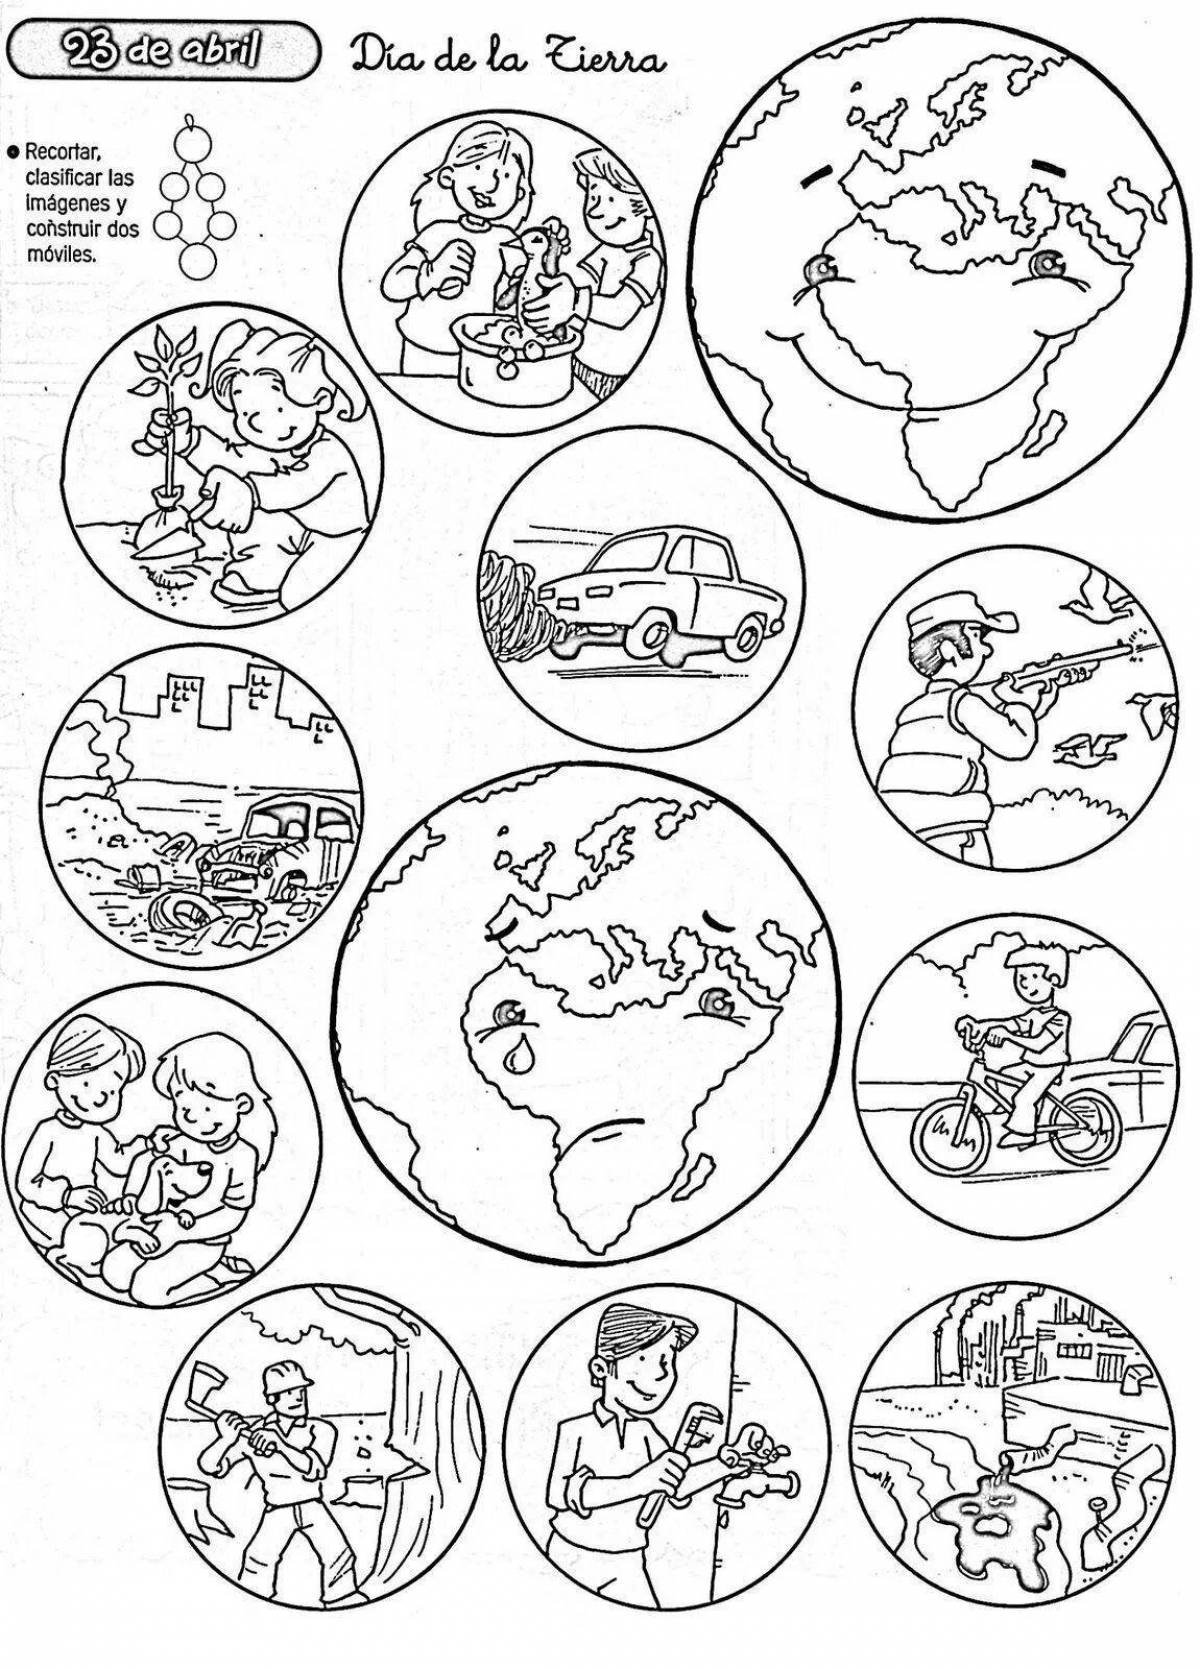 Bright coloring page of save the nature poster